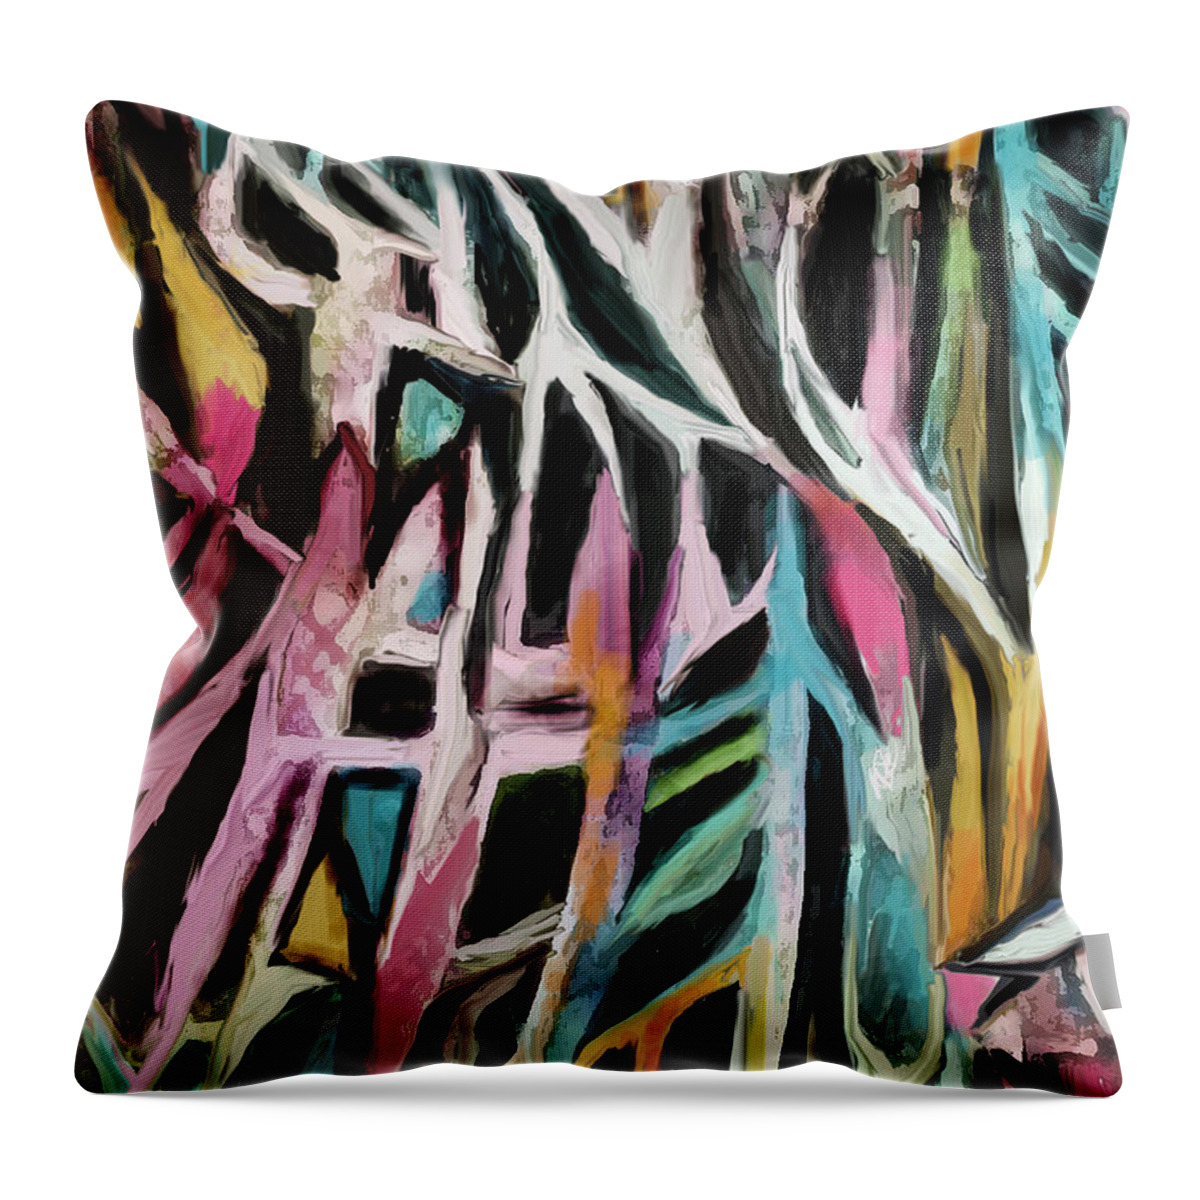 Colorful Abstract Throw Pillow featuring the mixed media Upward Expansion by Jean Batzell Fitzgerald